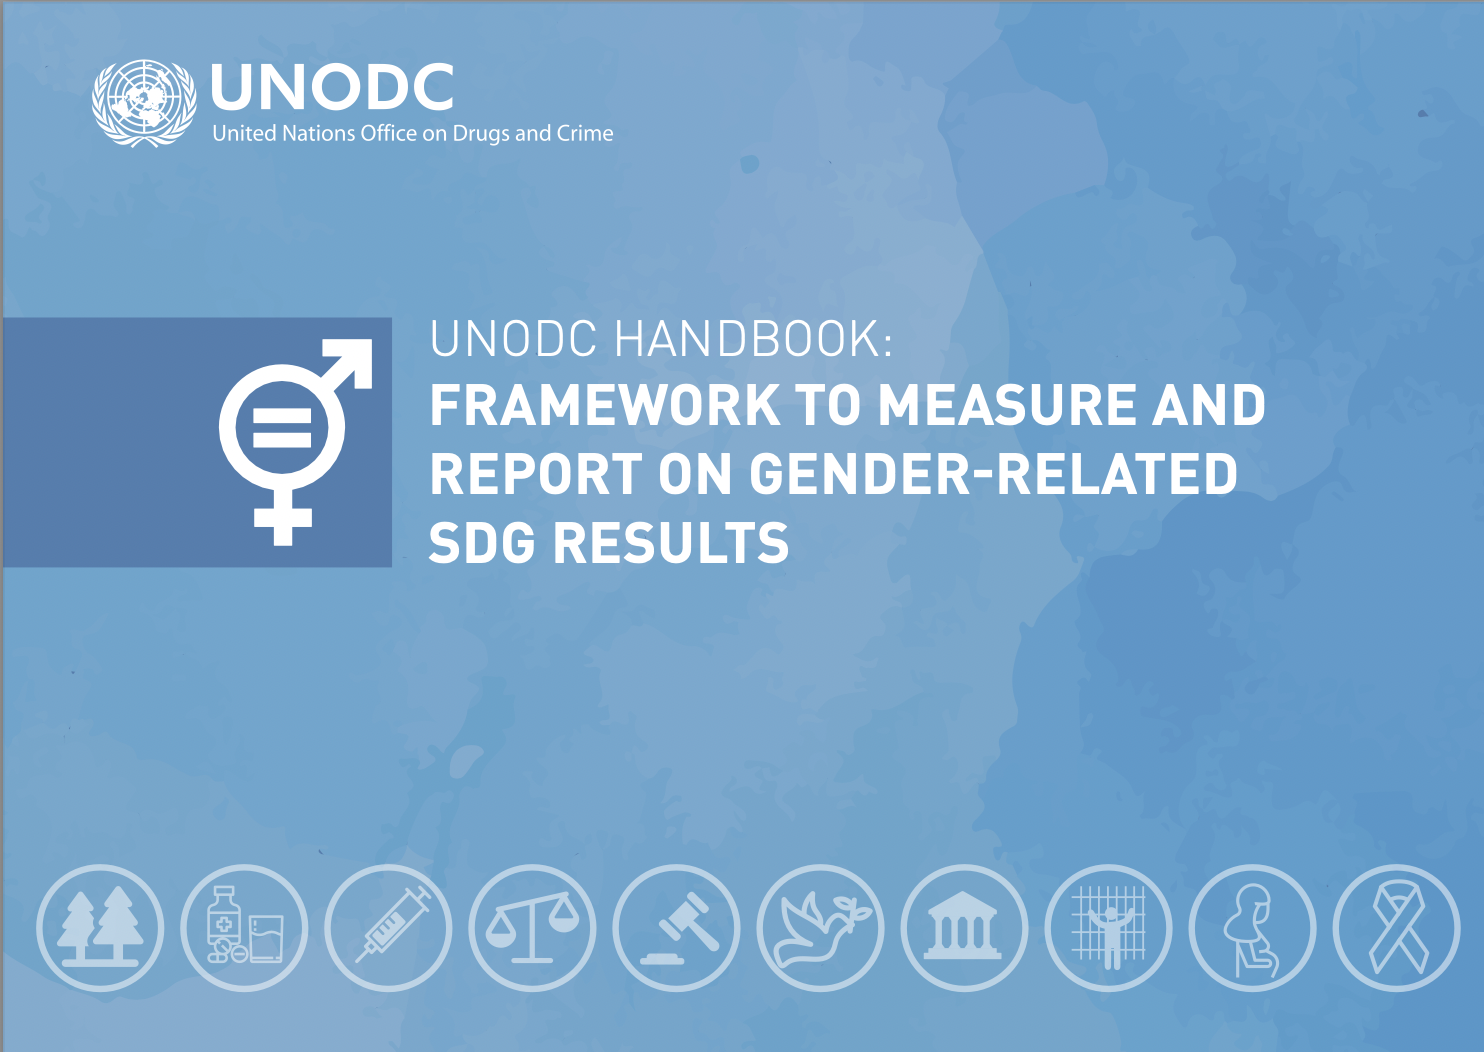 Header of the UNODC HANDBOOK: FRAMEWORK TO MEASURE AND REPORT ON GENDER-RELATED SDG RESULTS